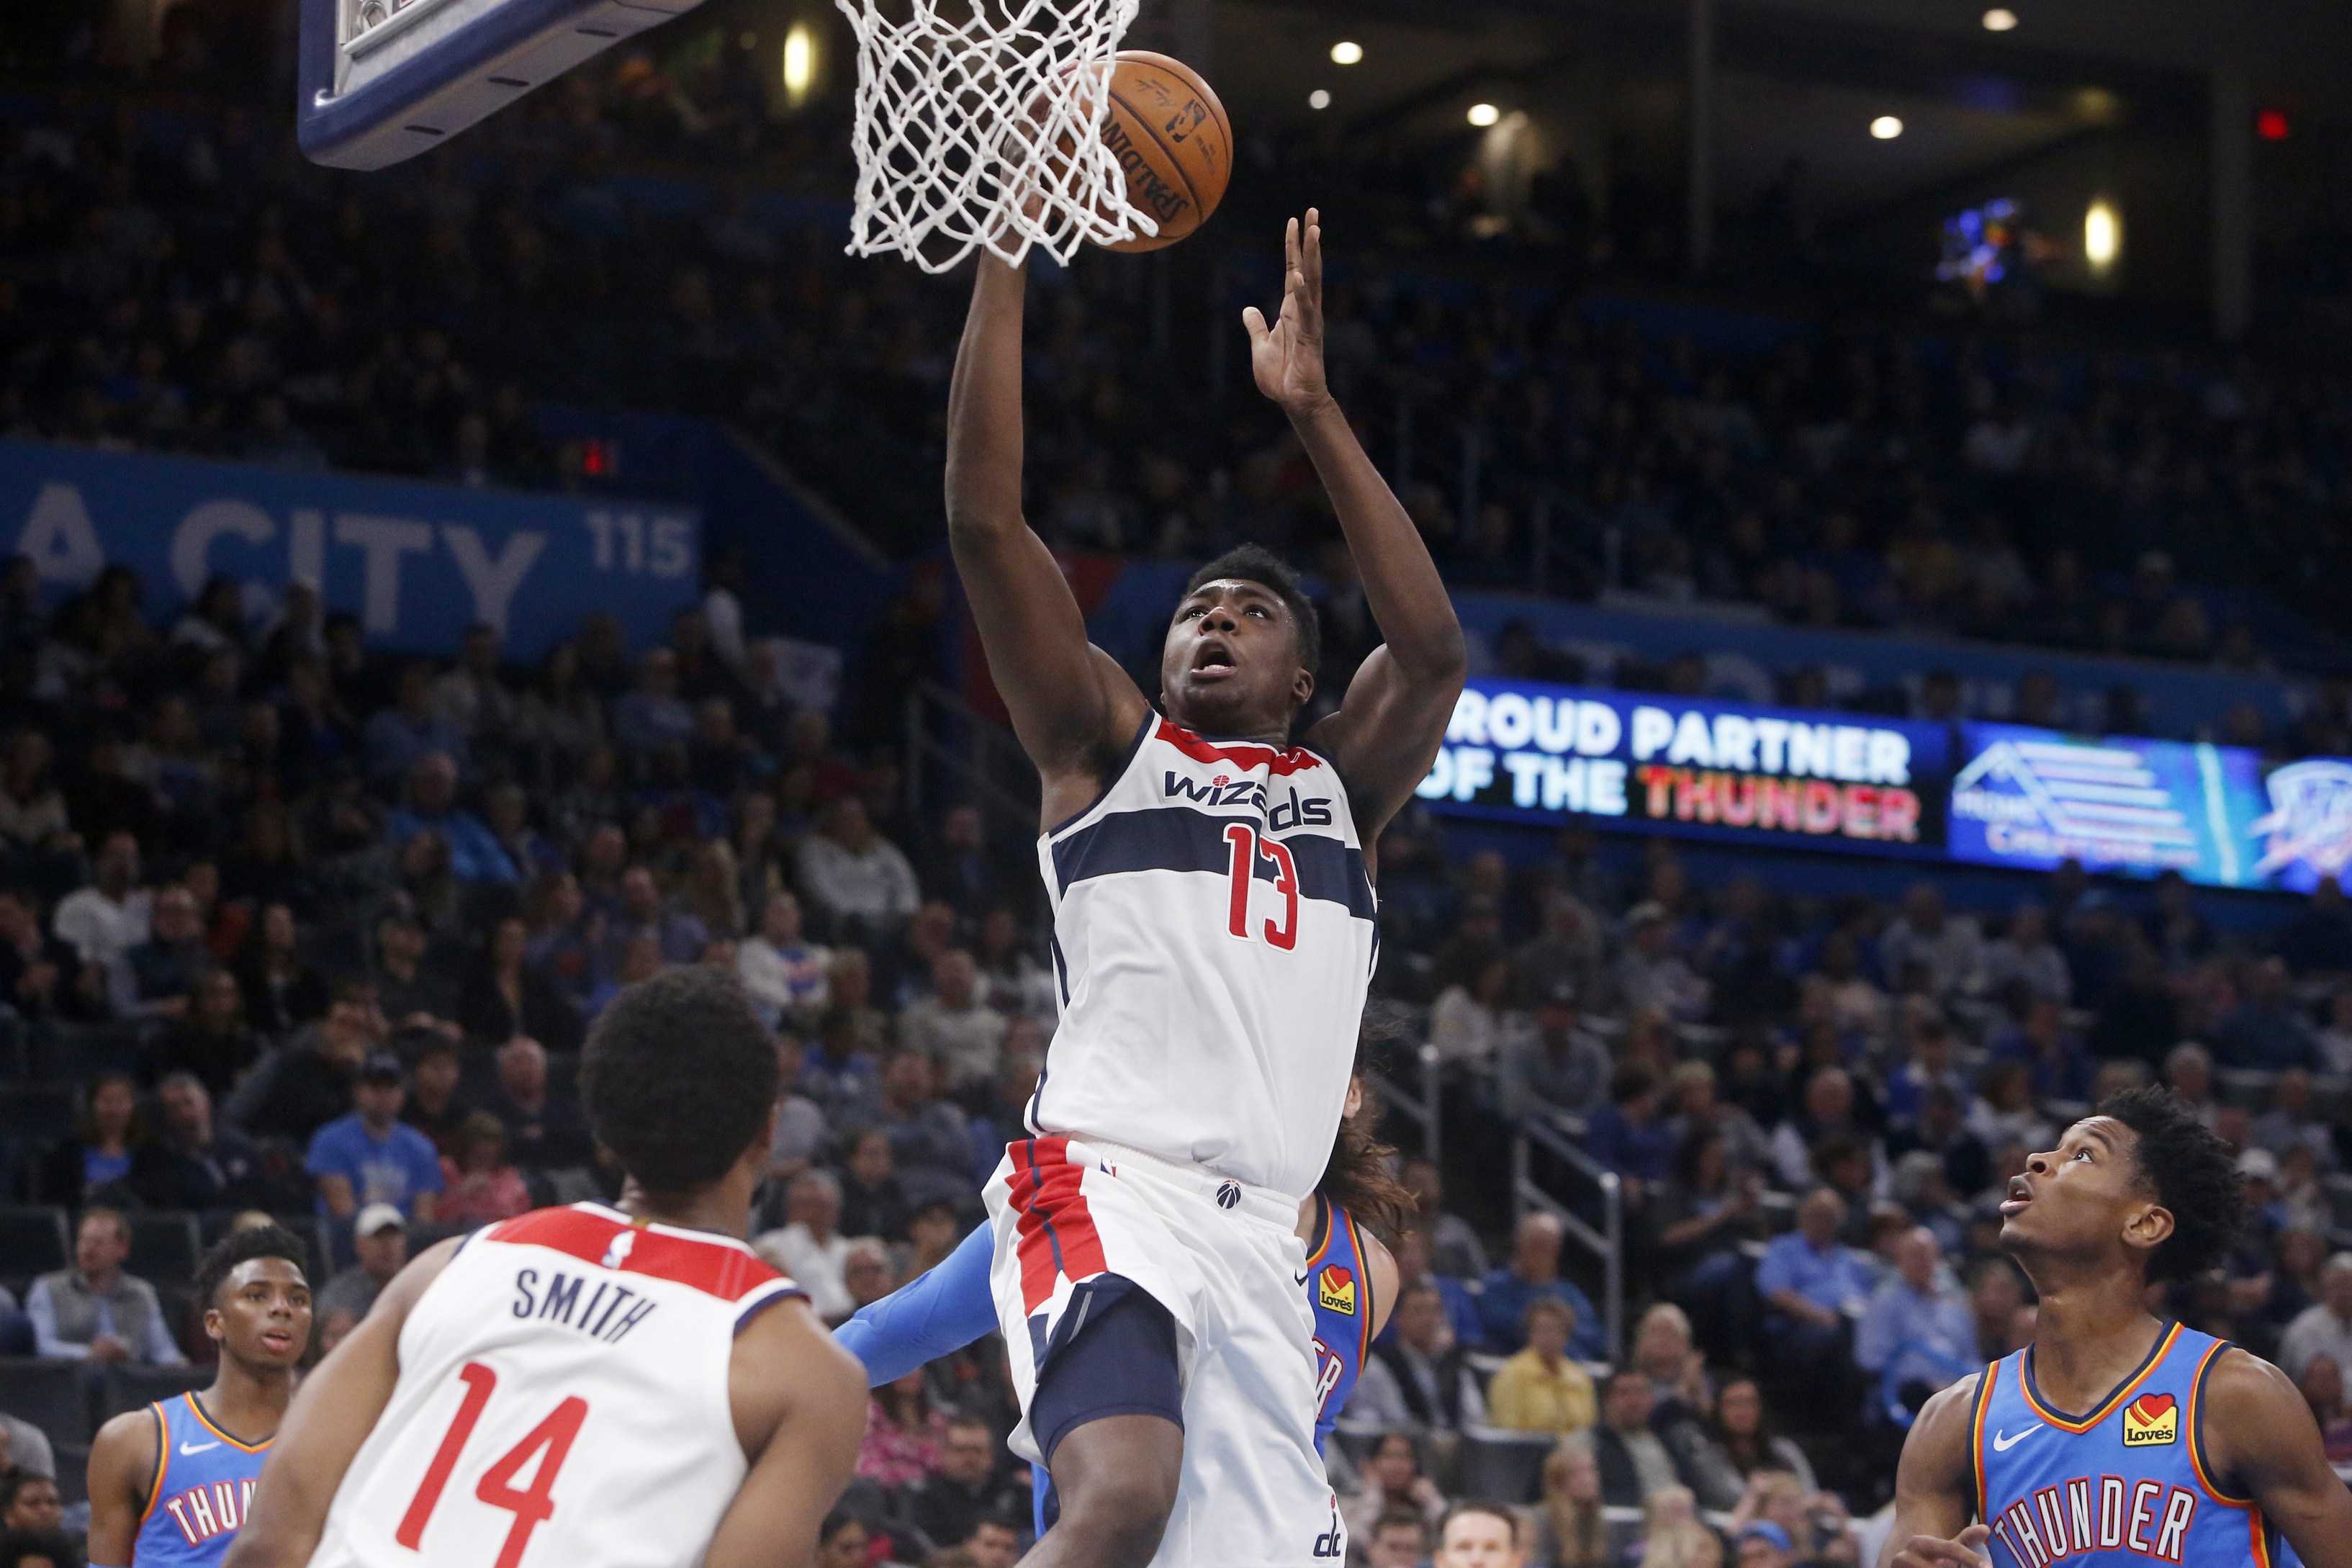 Bryant scores 21 points, Wizards top Thunder 97-85